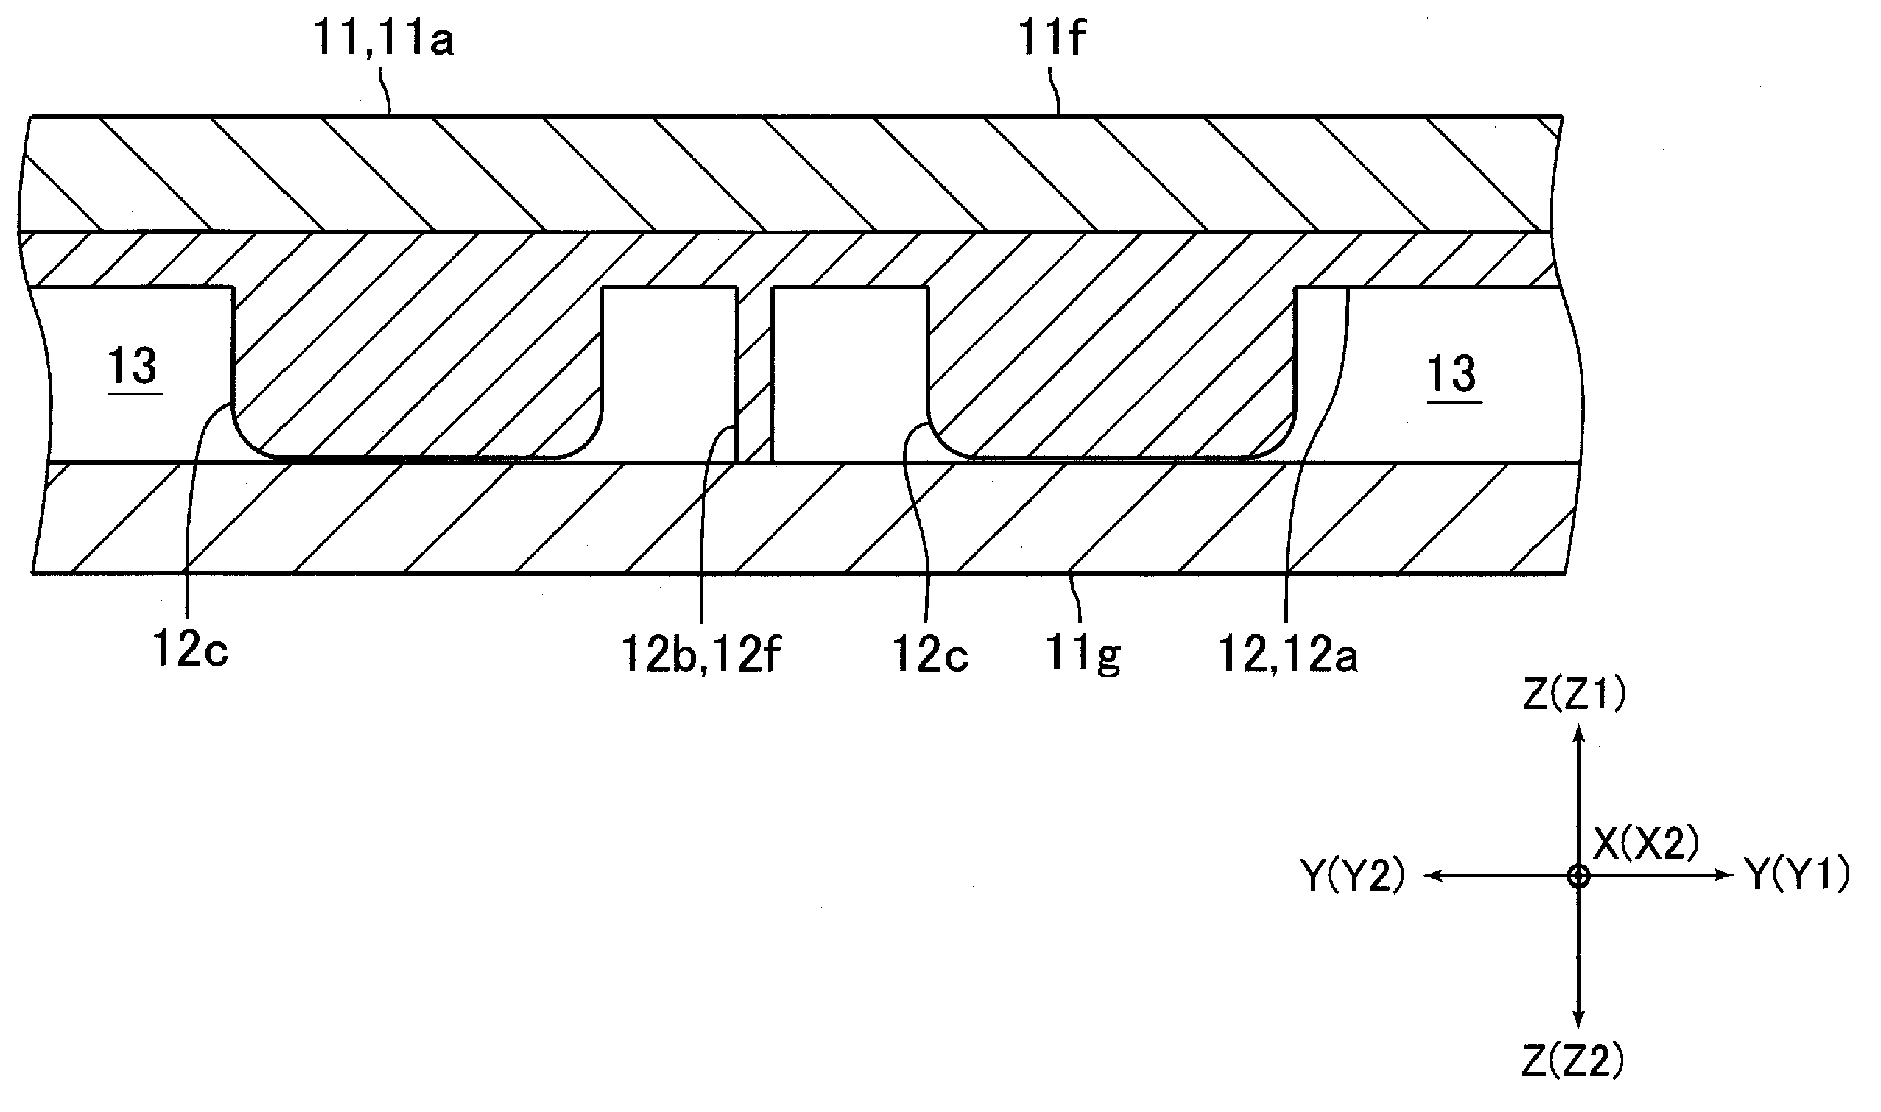 Head-cooling pillow and head-cooling device